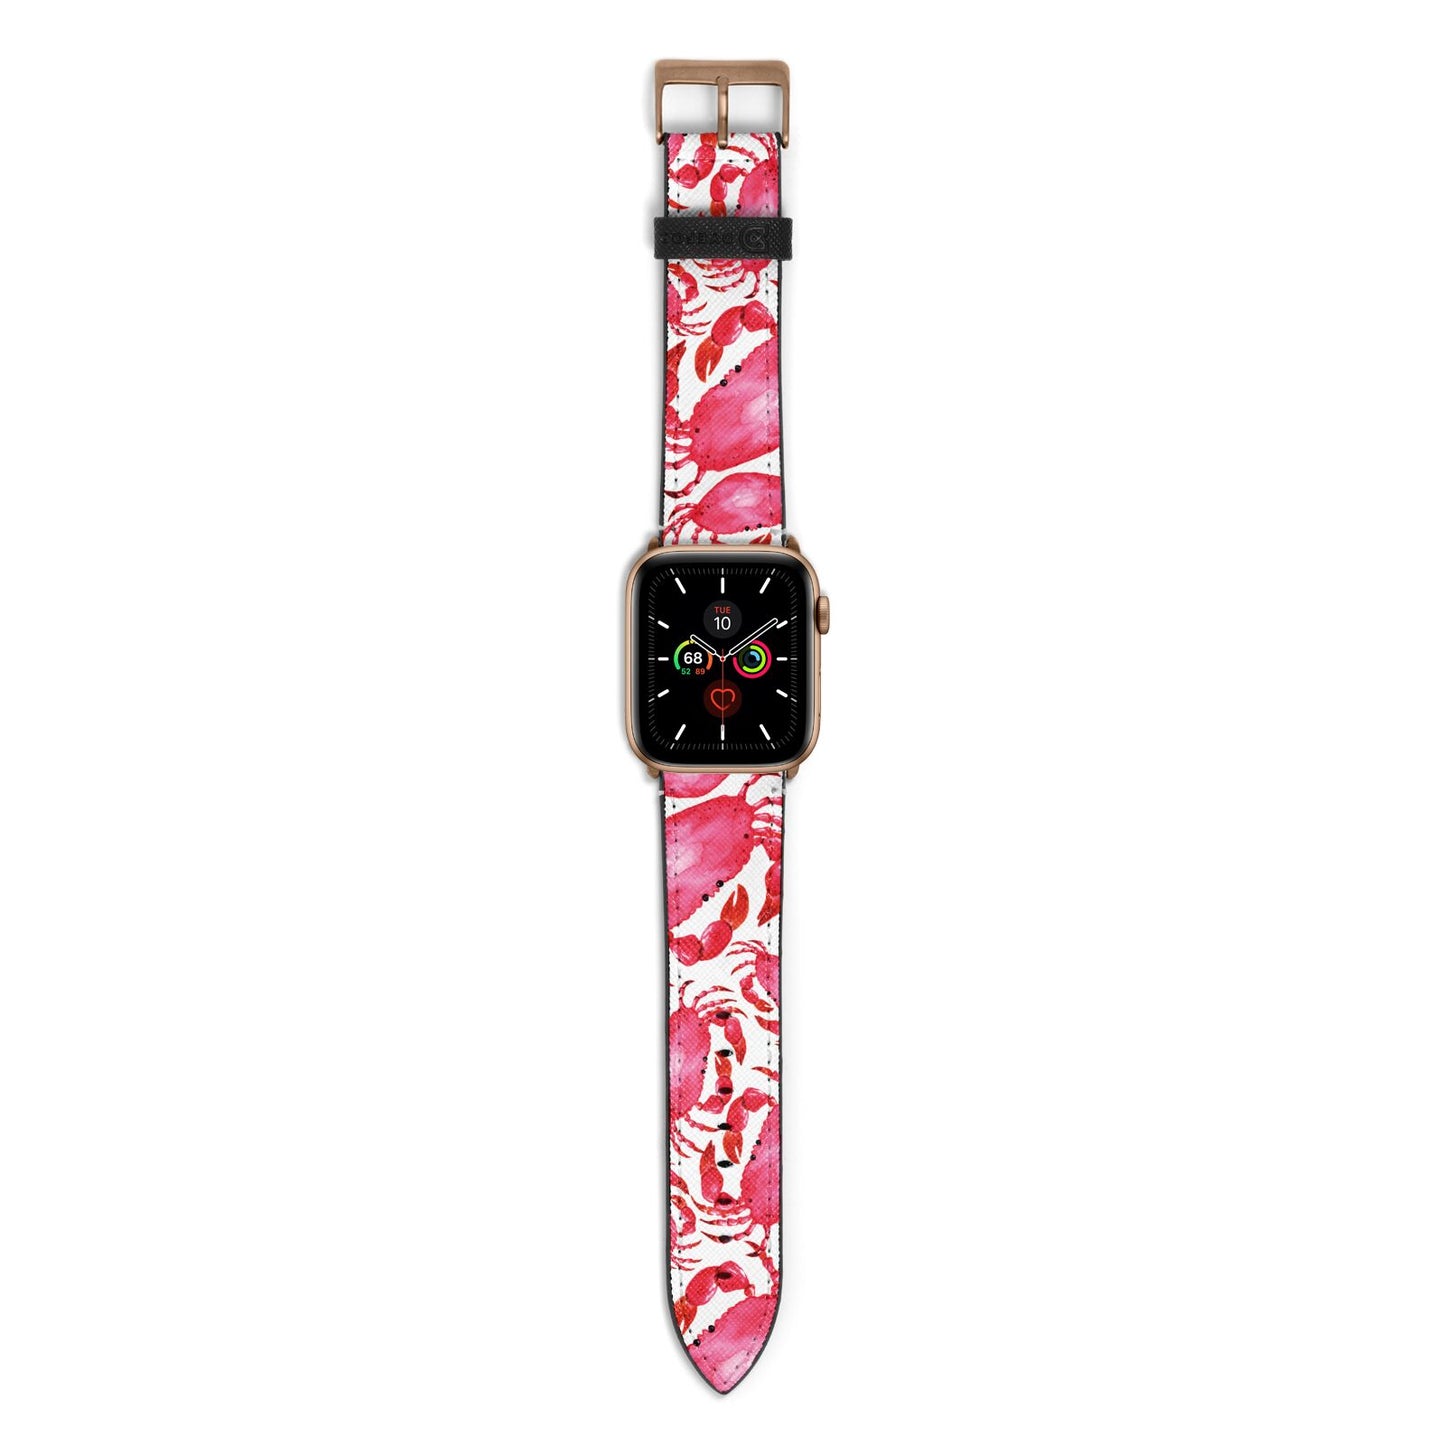 Crab Apple Watch Strap with Gold Hardware